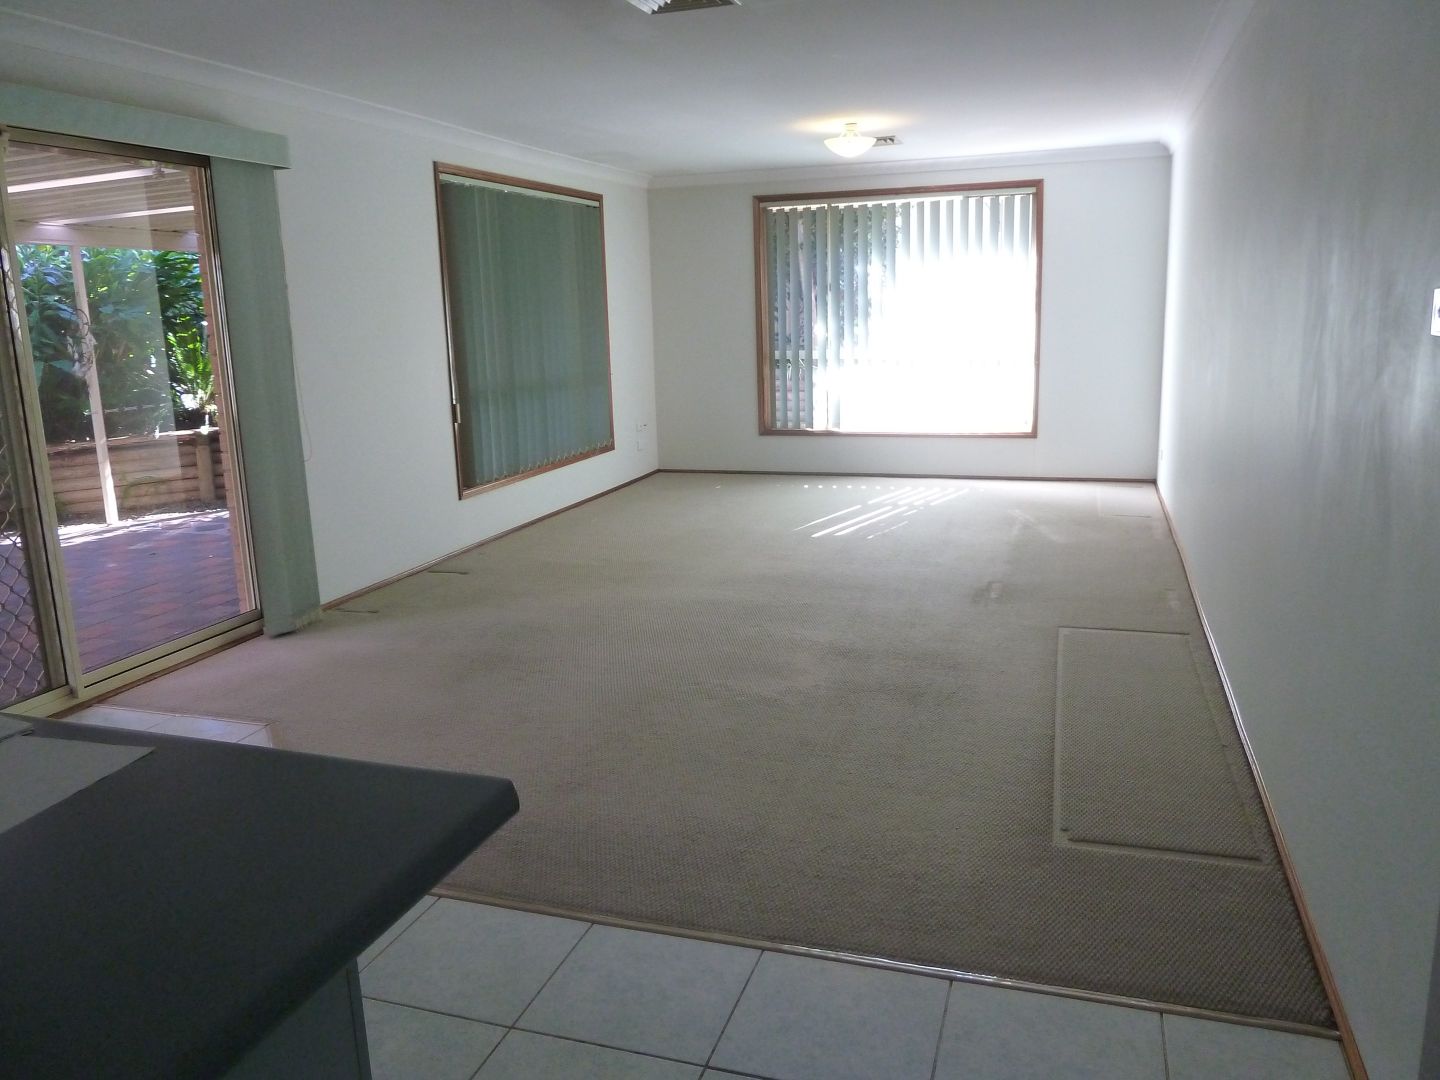 60 Summerfield, Quakers Hill NSW 2763, Image 2